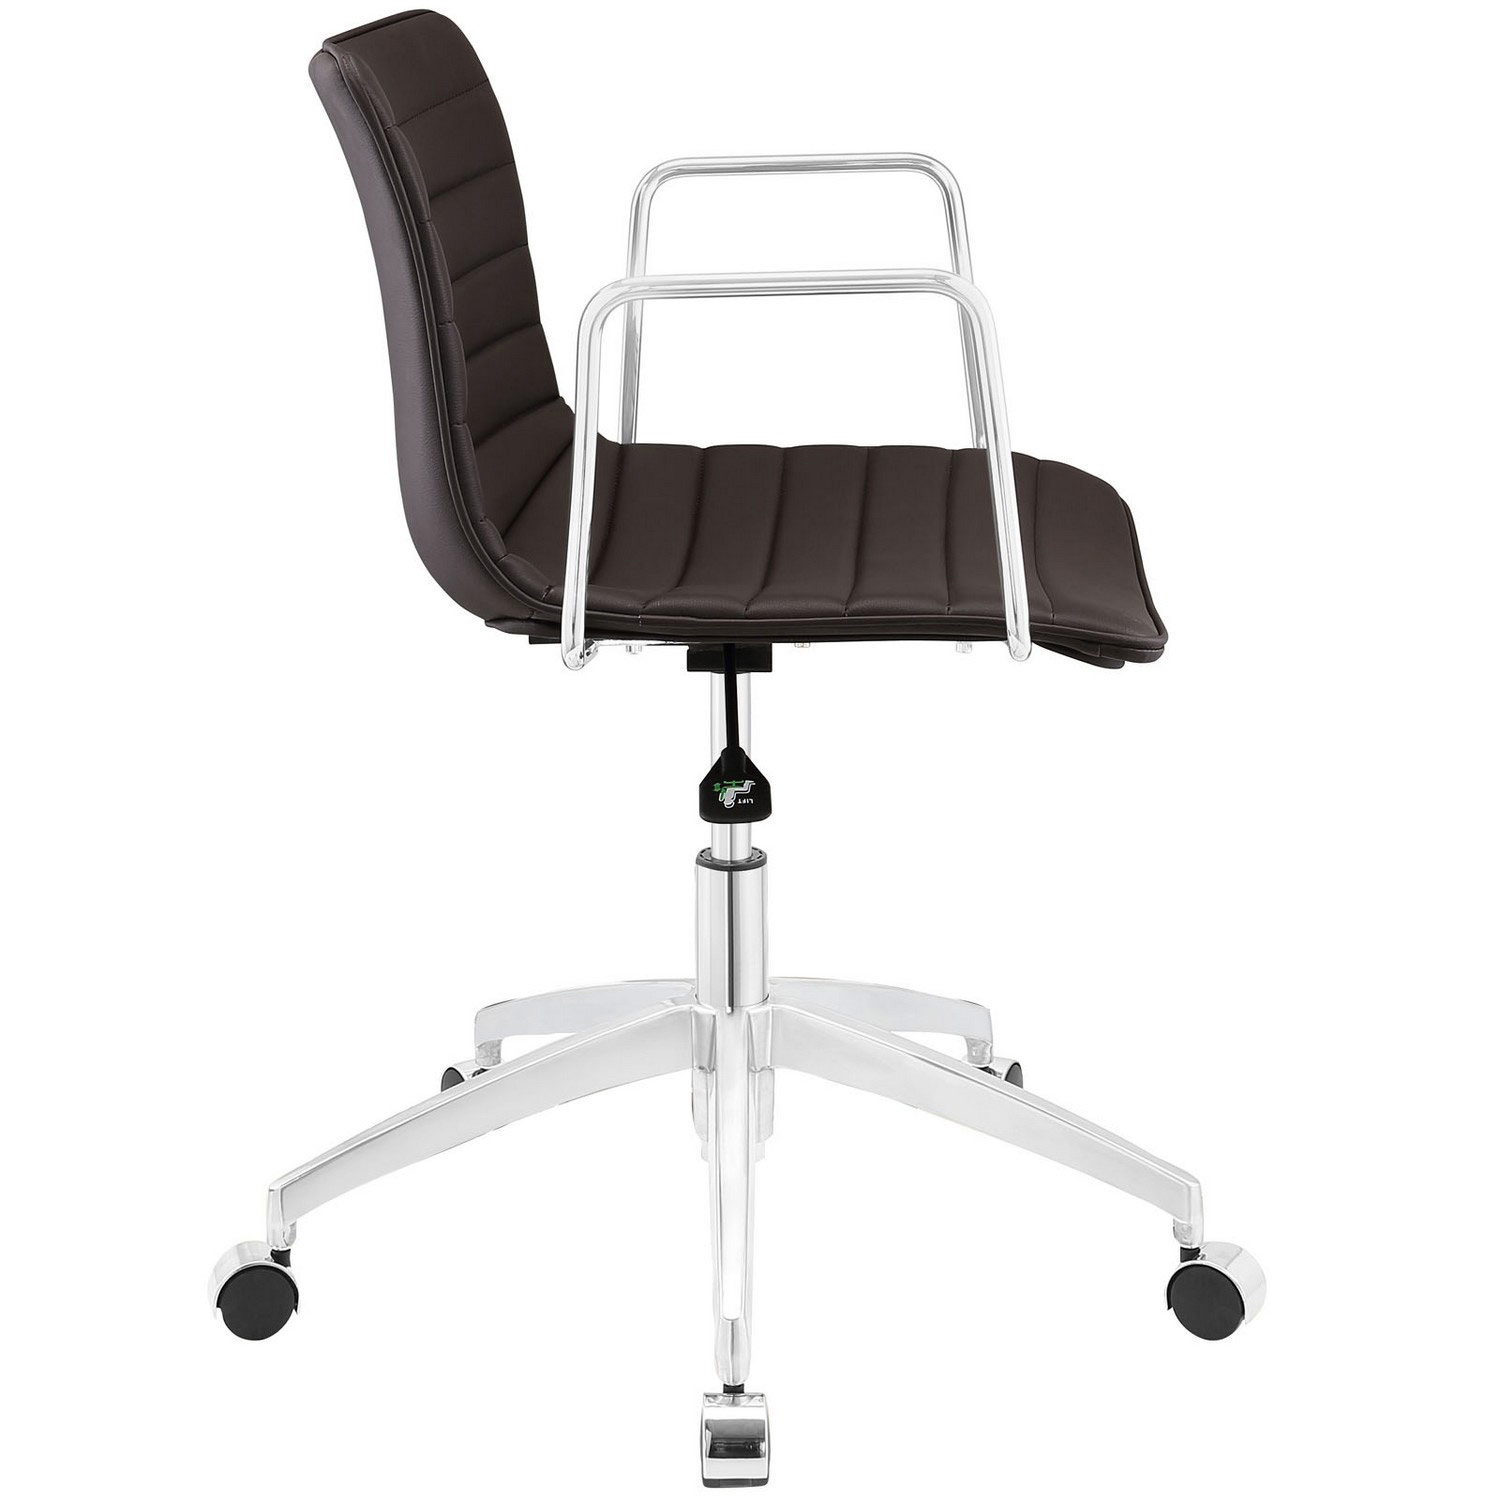 Modway Celerity Office Chair - Brown